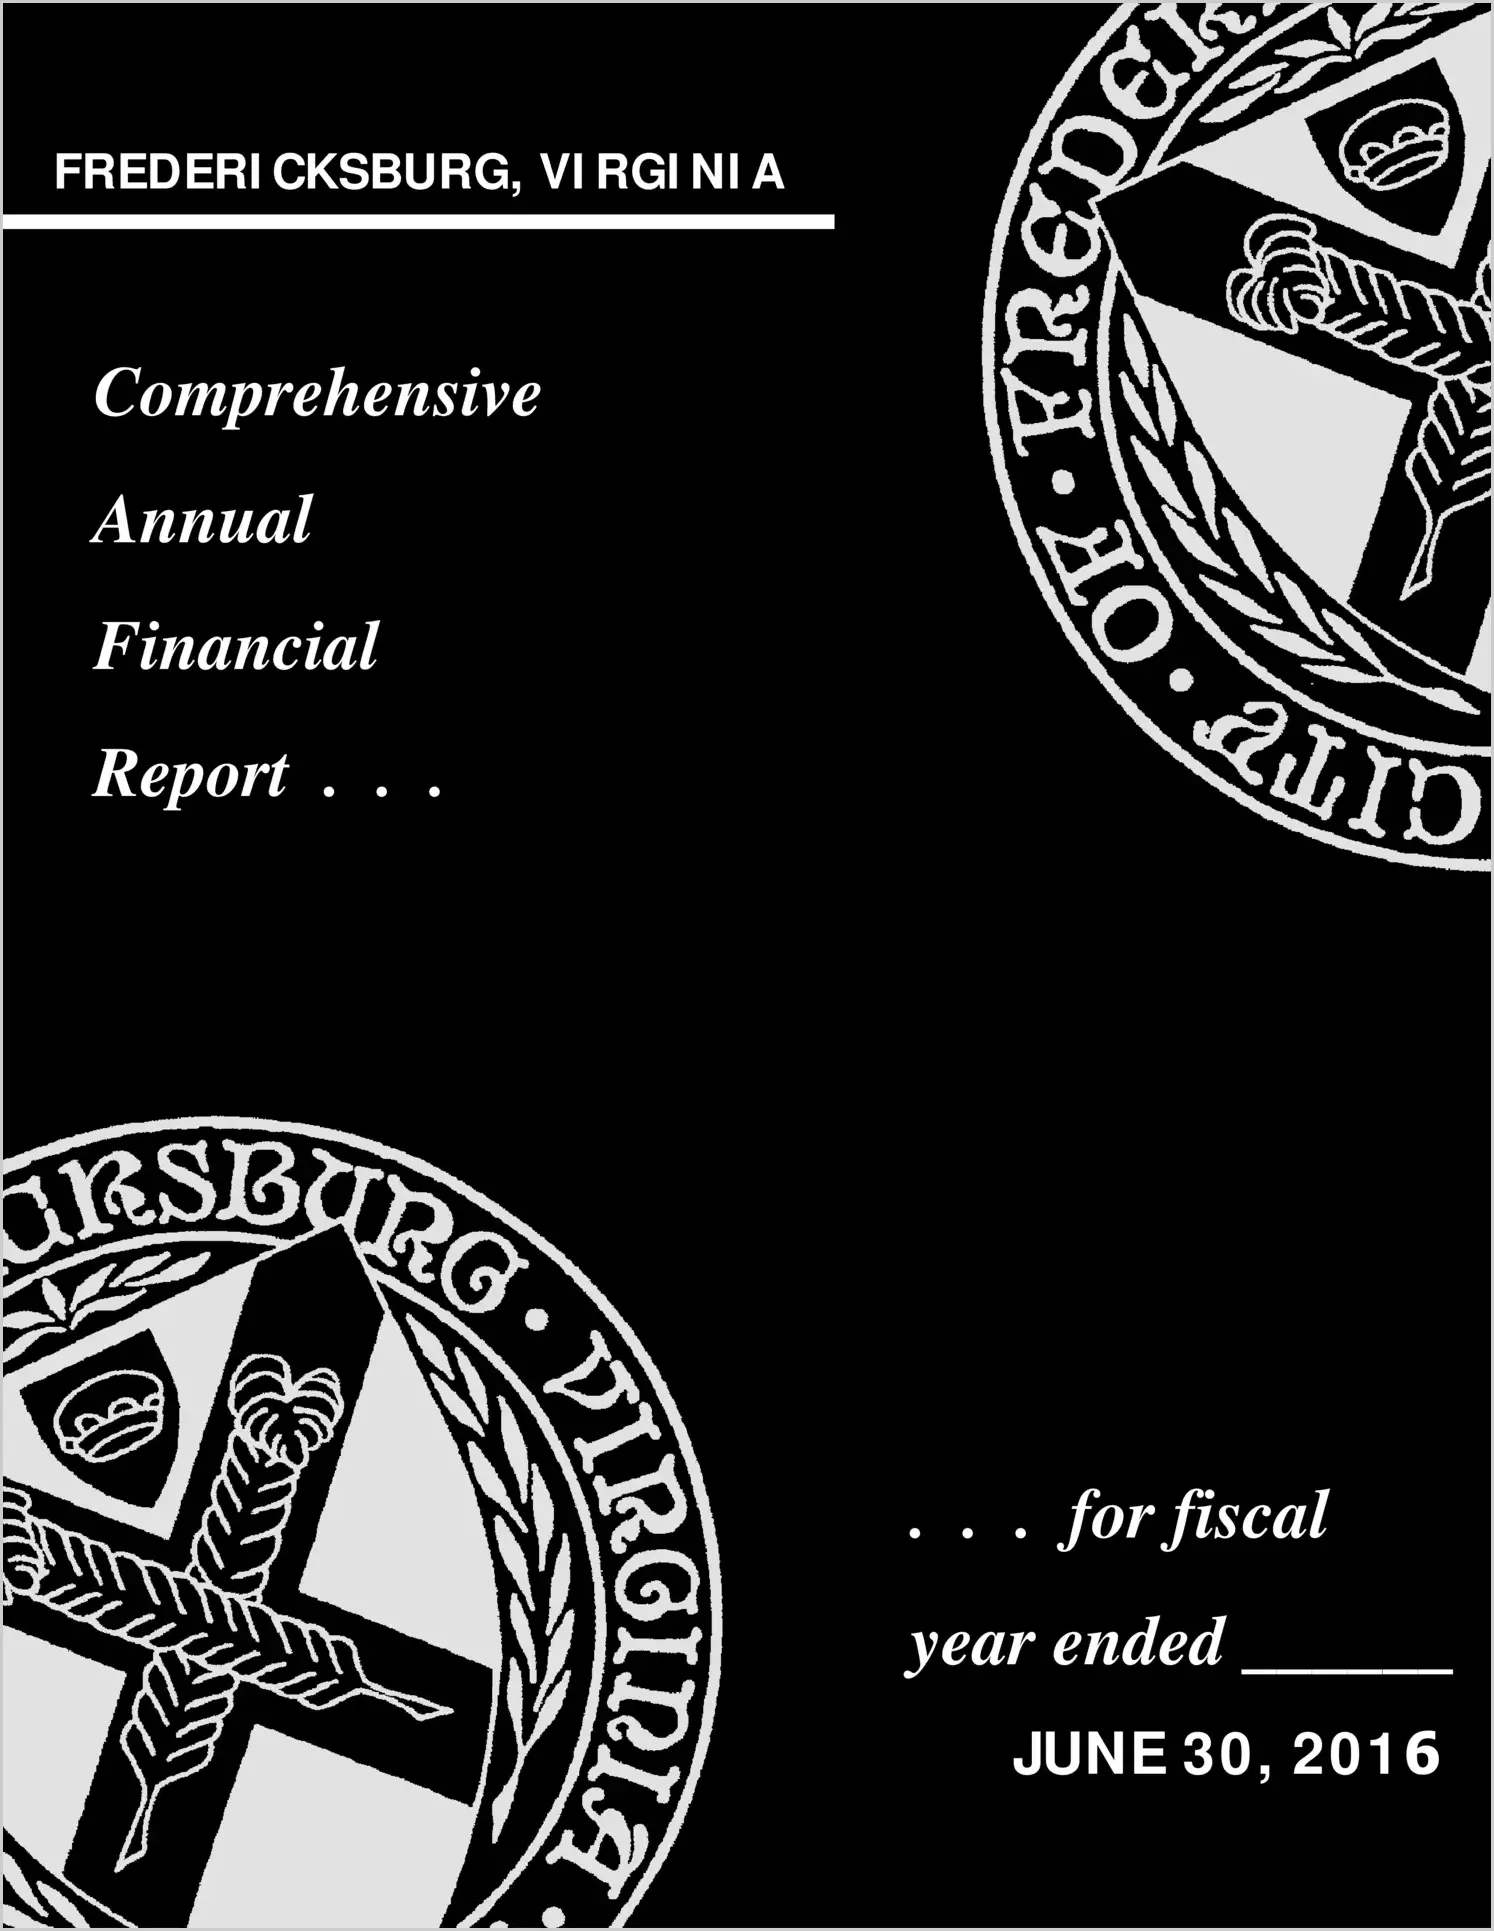 2016 Annual Financial Report for City of Fredericksburg